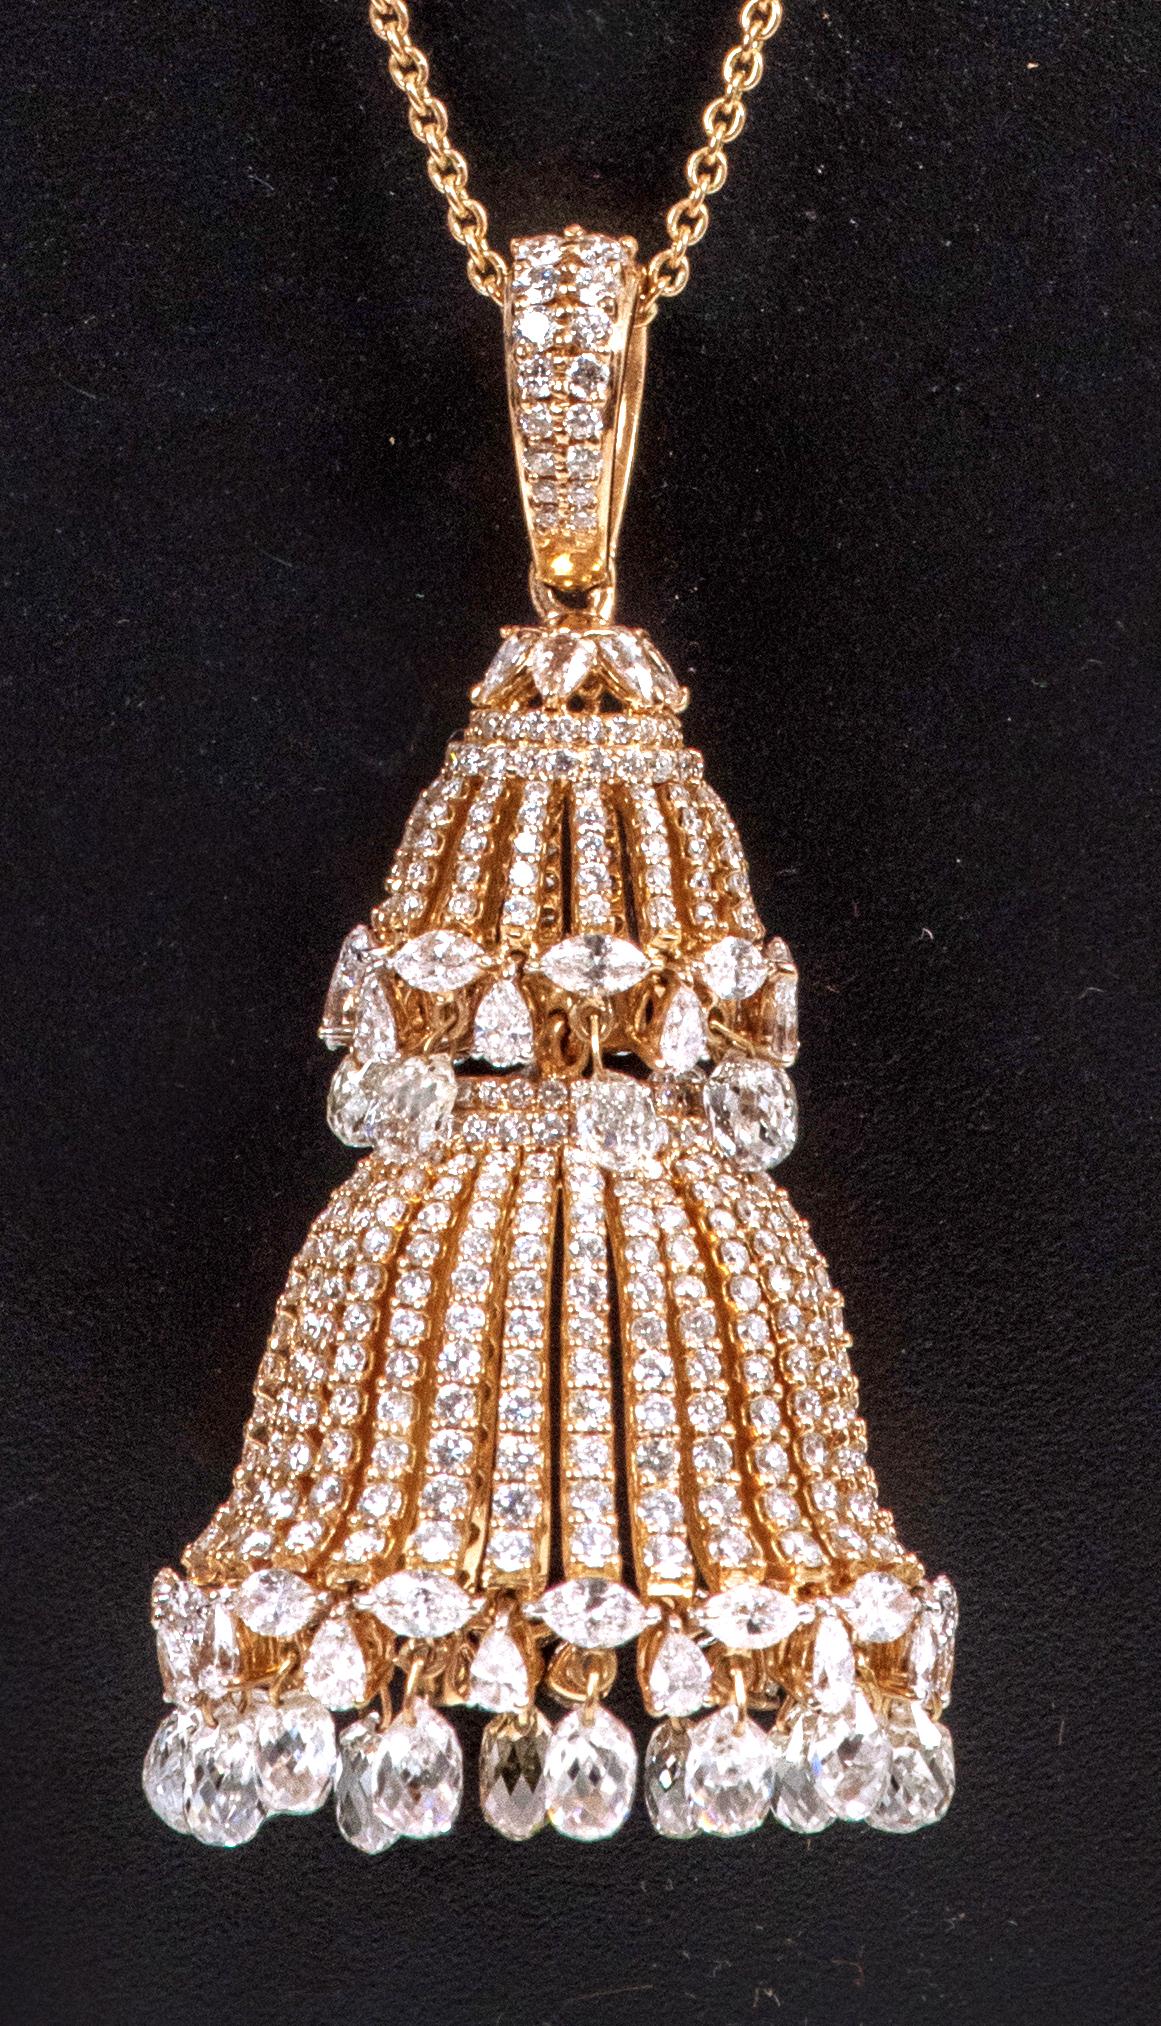 18 Karat Rose Gold 12.45 Carat Diamond Chandelier Drop Pendant with Link Chain Necklace

This extraordinary diamond drop chandelier style long pendant is sensational. The articulate chandelier design in rose gold is formed with two rows of pave set